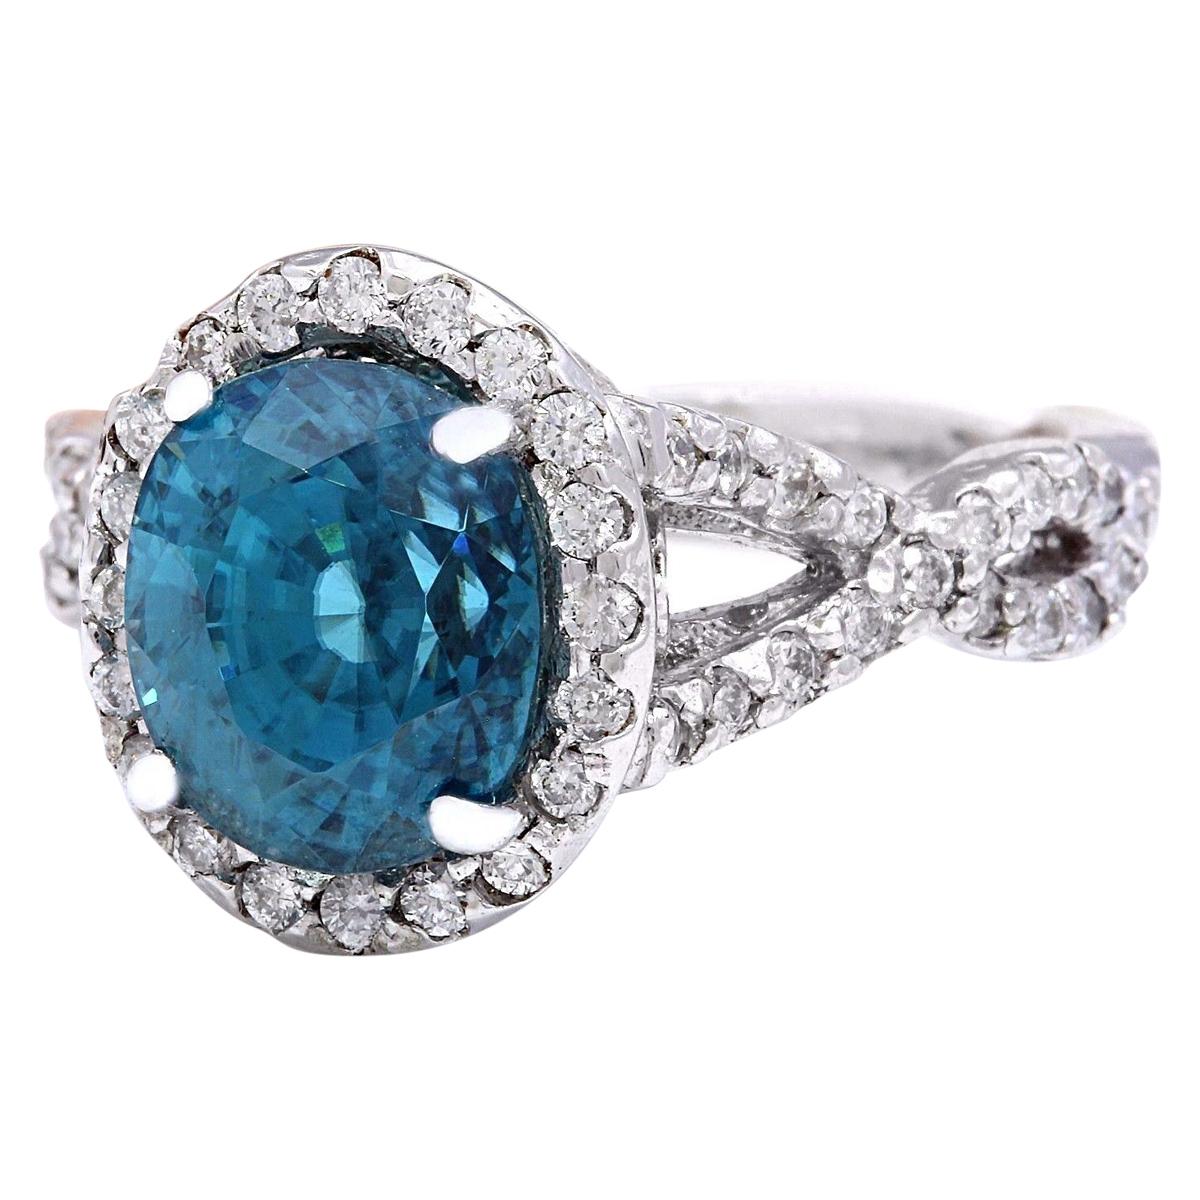 6.99 Carat Natural Zircon 14K Solid White Gold Diamond Ring
 Item Type: Ring
 Item Style: Engagement
 Material: 14K White Gold
 Mainstone: Zircon
 Stone Color: Blue
 Stone Weight: 6.09 Carat
 Stone Shape: Oval
 Stone Quantity: 1
 Stone Dimensions: